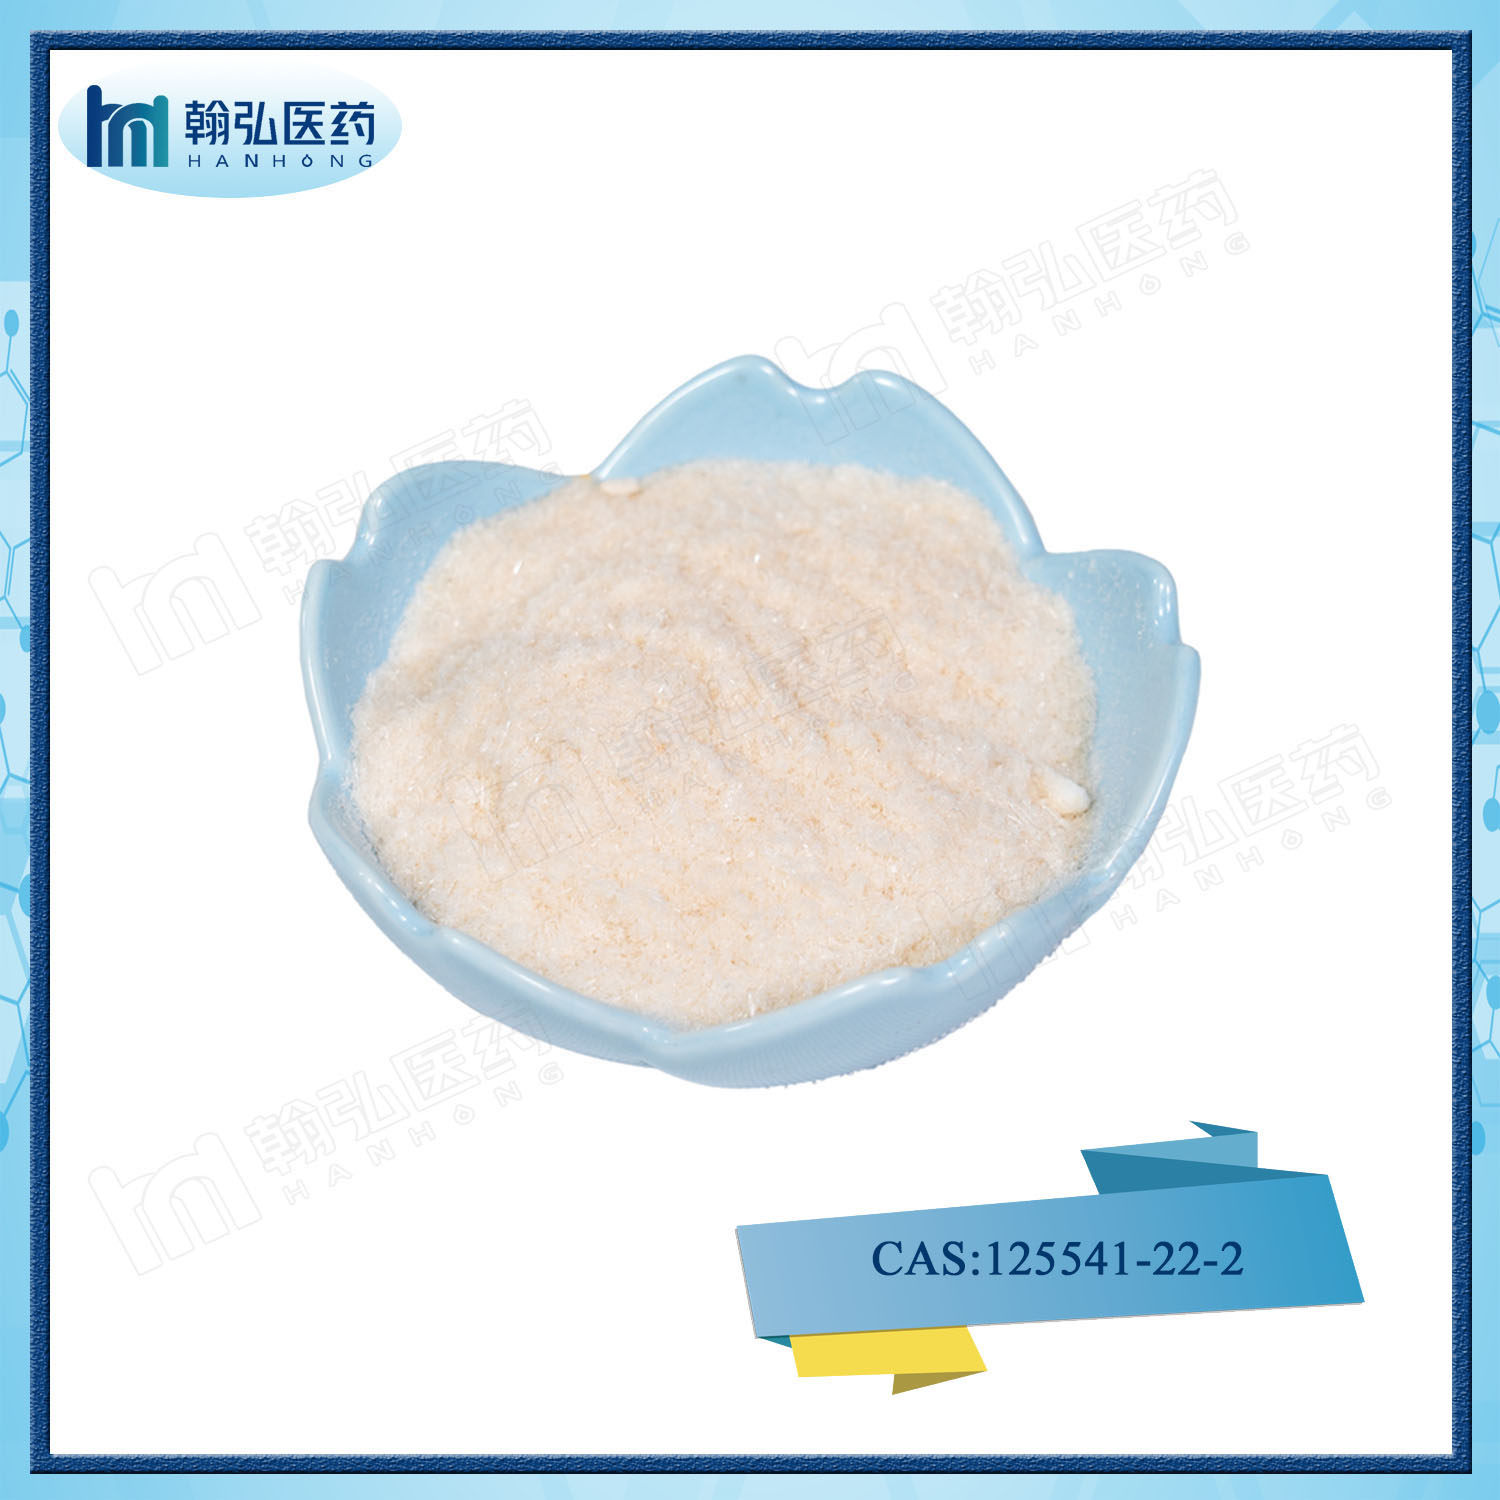 High Quality High Purity 99% 1-N-Boc-4-(Phenylamino)piperidine CAS 125541-22-2/19099-93-5/79099-07-3 in Stock Whatsapp/Wechat: +8615927457486 WickrMe: Ccassie